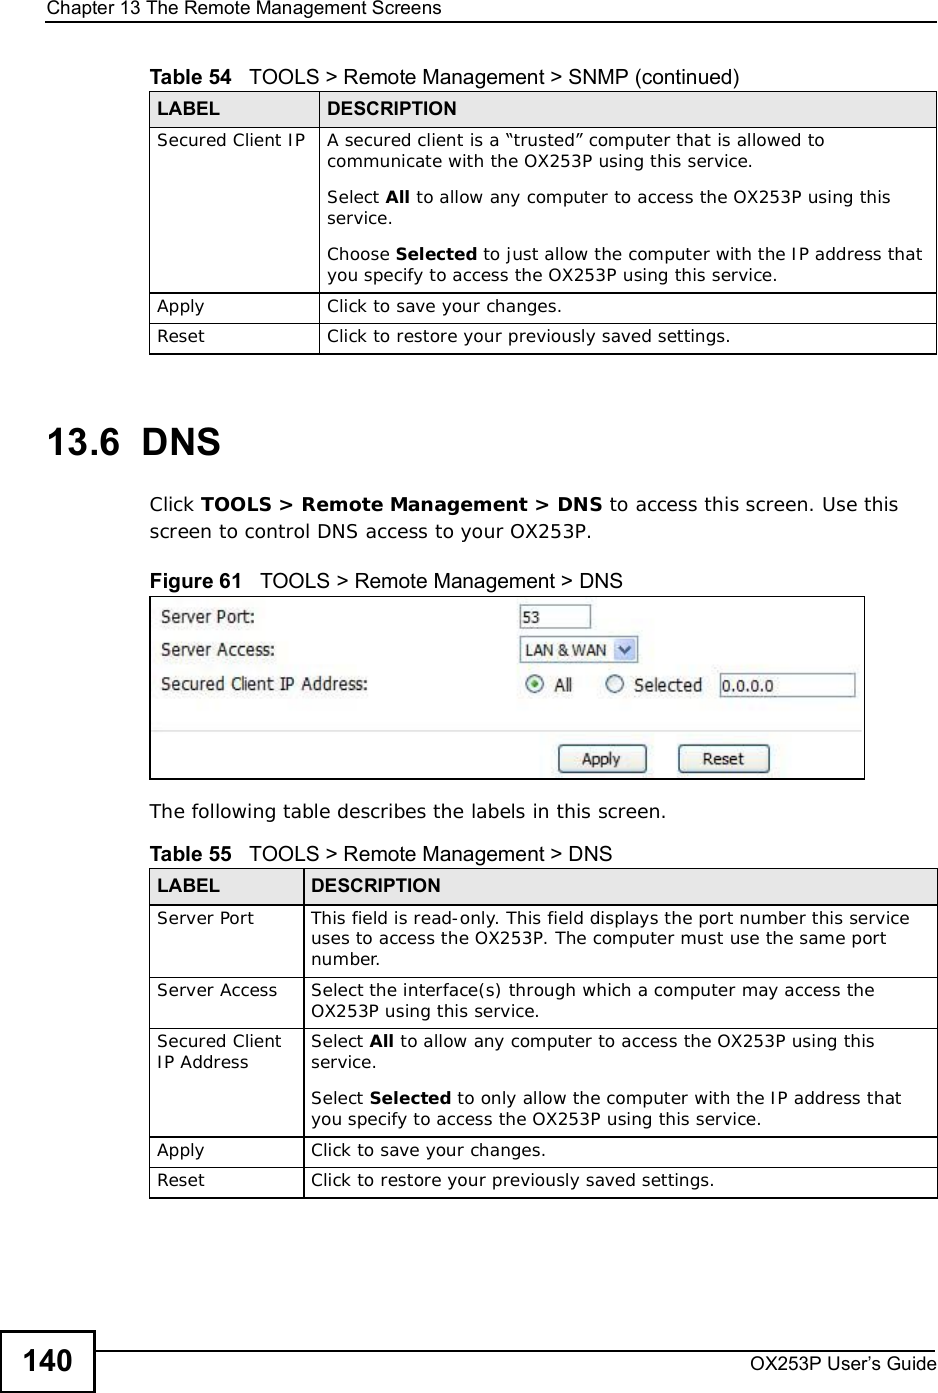 Chapter 13The Remote Management ScreensOX253P User’s Guide14013.6  DNSClick TOOLS &gt; Remote Management &gt; DNS to access this screen. Use this screen to control DNS access to your OX253P.Figure 61   TOOLS &gt; Remote Management &gt; DNSThe following table describes the labels in this screen.Secured Client IP A secured client is a “trusted” computer that is allowed to communicate with the OX253P using this service. Select All to allow any computer to access the OX253P using this service.Choose Selected to just allow the computer with the IP address that you specify to access the OX253P using this service.Apply Click to save your changes.Reset Click to restore your previously saved settings.Table 54   TOOLS &gt; Remote Management &gt; SNMP (continued)LABEL DESCRIPTIONTable 55   TOOLS &gt; Remote Management &gt; DNSLABEL DESCRIPTIONServer Port This field is read-only. This field displays the port number this service uses to access the OX253P. The computer must use the same port number.Server Access Select the interface(s) through which a computer may access the OX253P using this service.Secured Client IP Address Select All to allow any computer to access the OX253P using this service.Select Selected to only allow the computer with the IP address that you specify to access the OX253P using this service.Apply Click to save your changes.Reset Click to restore your previously saved settings.